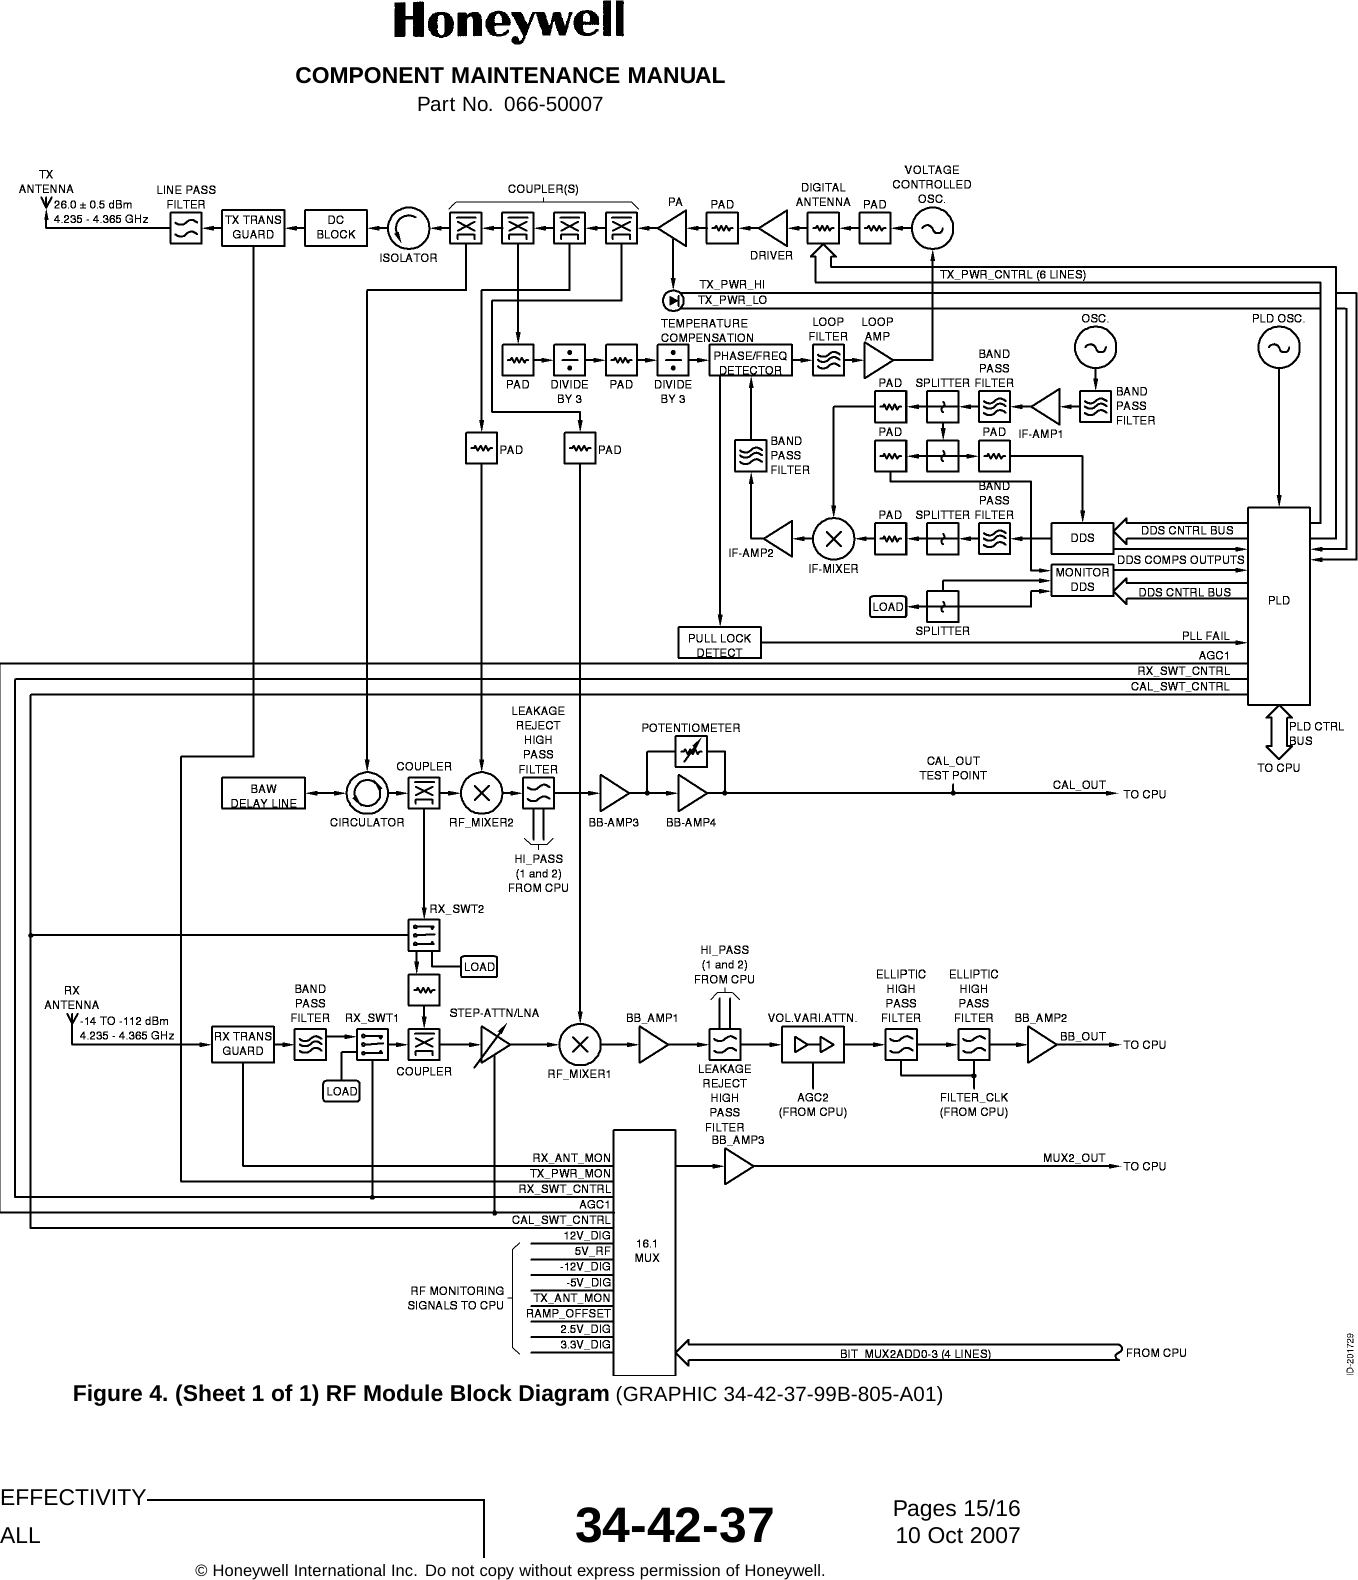 COMPONENT MAINTENANCE MANUALPart No. 066-50007Figure 4. (Sheet 1 of 1) RF Module Block Diagram (GRAPHIC 34-42-37-99B-805-A01)EFFECTIVITYALL 34-42-37 Pages 15/1610 Oct 2007© Honeywell International Inc. Do not copy without express permission of Honeywell.